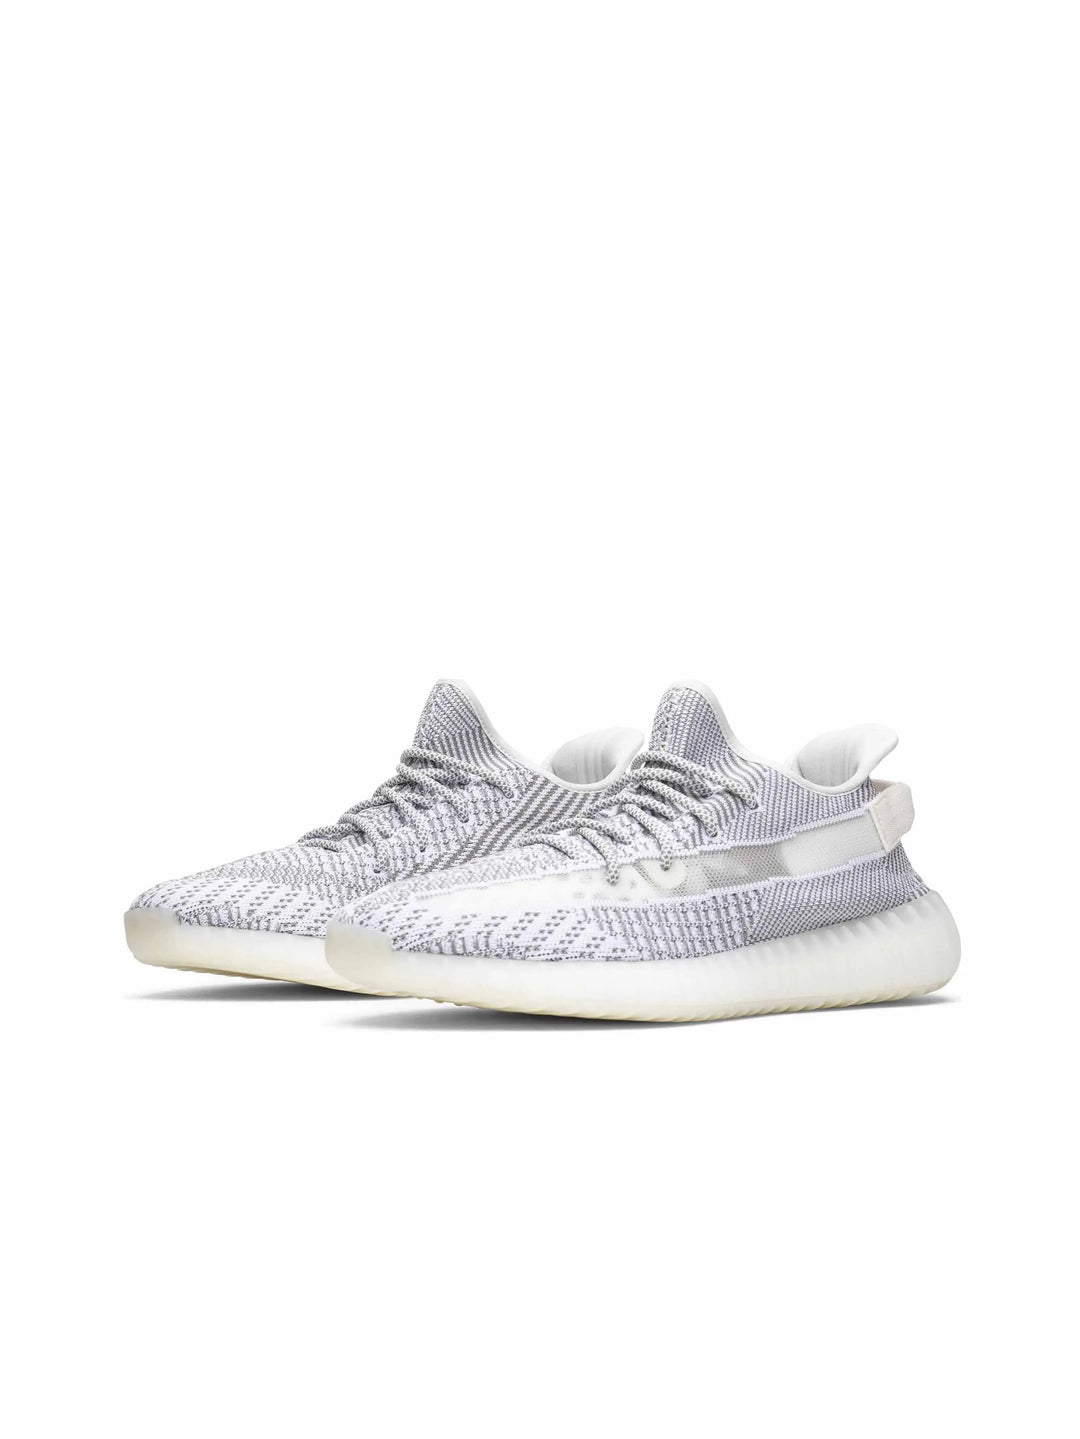 adidas Yeezy Boost 350 V2 Static (Non-Reflective) (2018/2023) - Prior